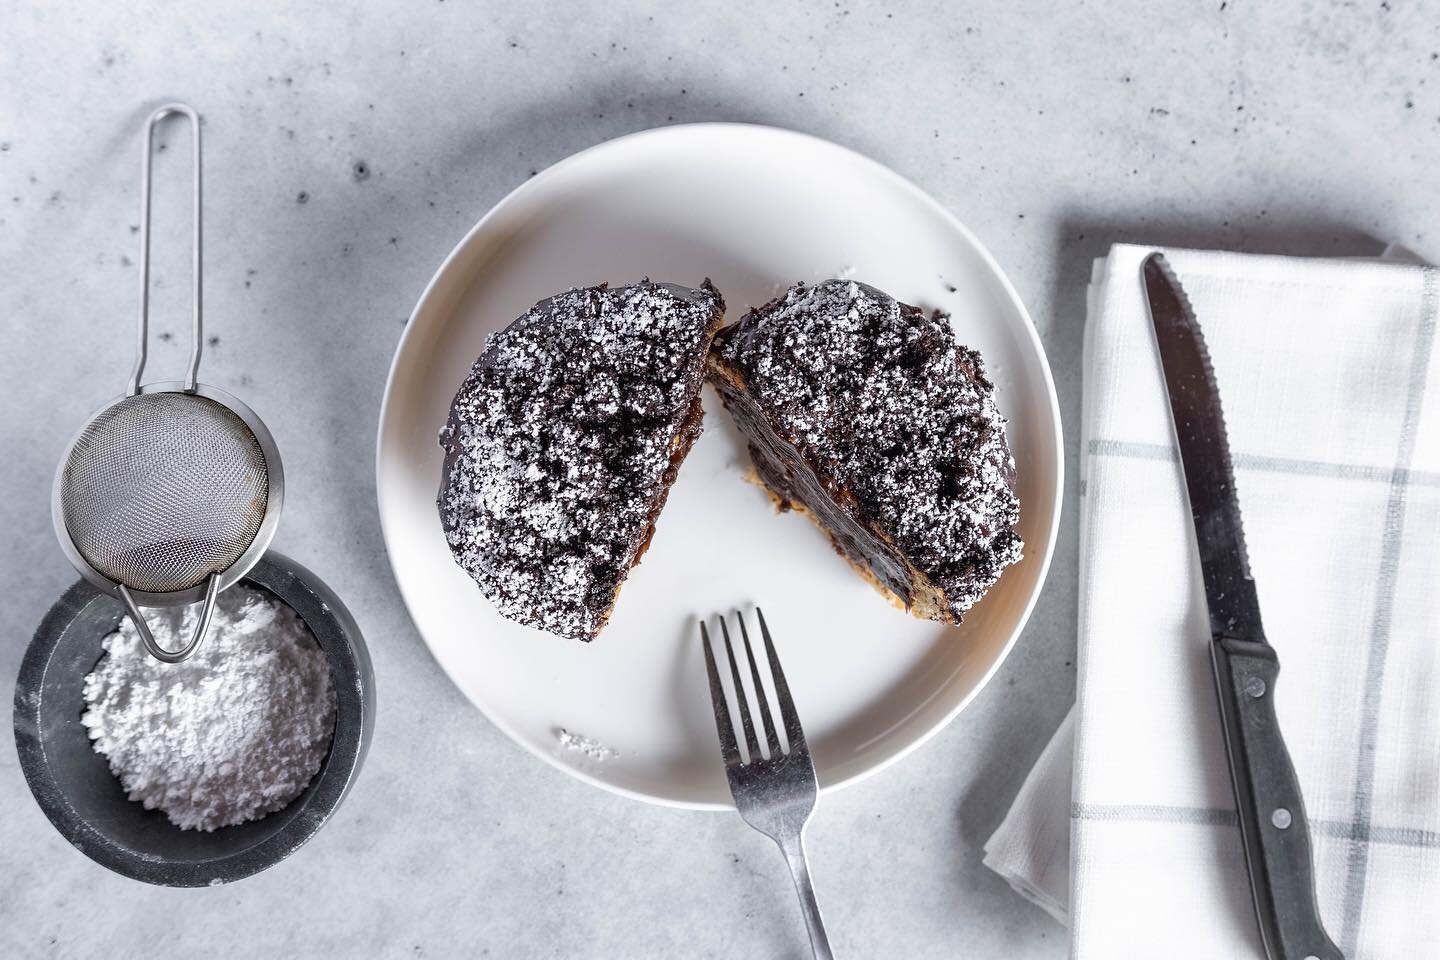 Who had the Chocolate Overload this week? Chocolate pudding filled, topped with chocolate cake and powdered sugar